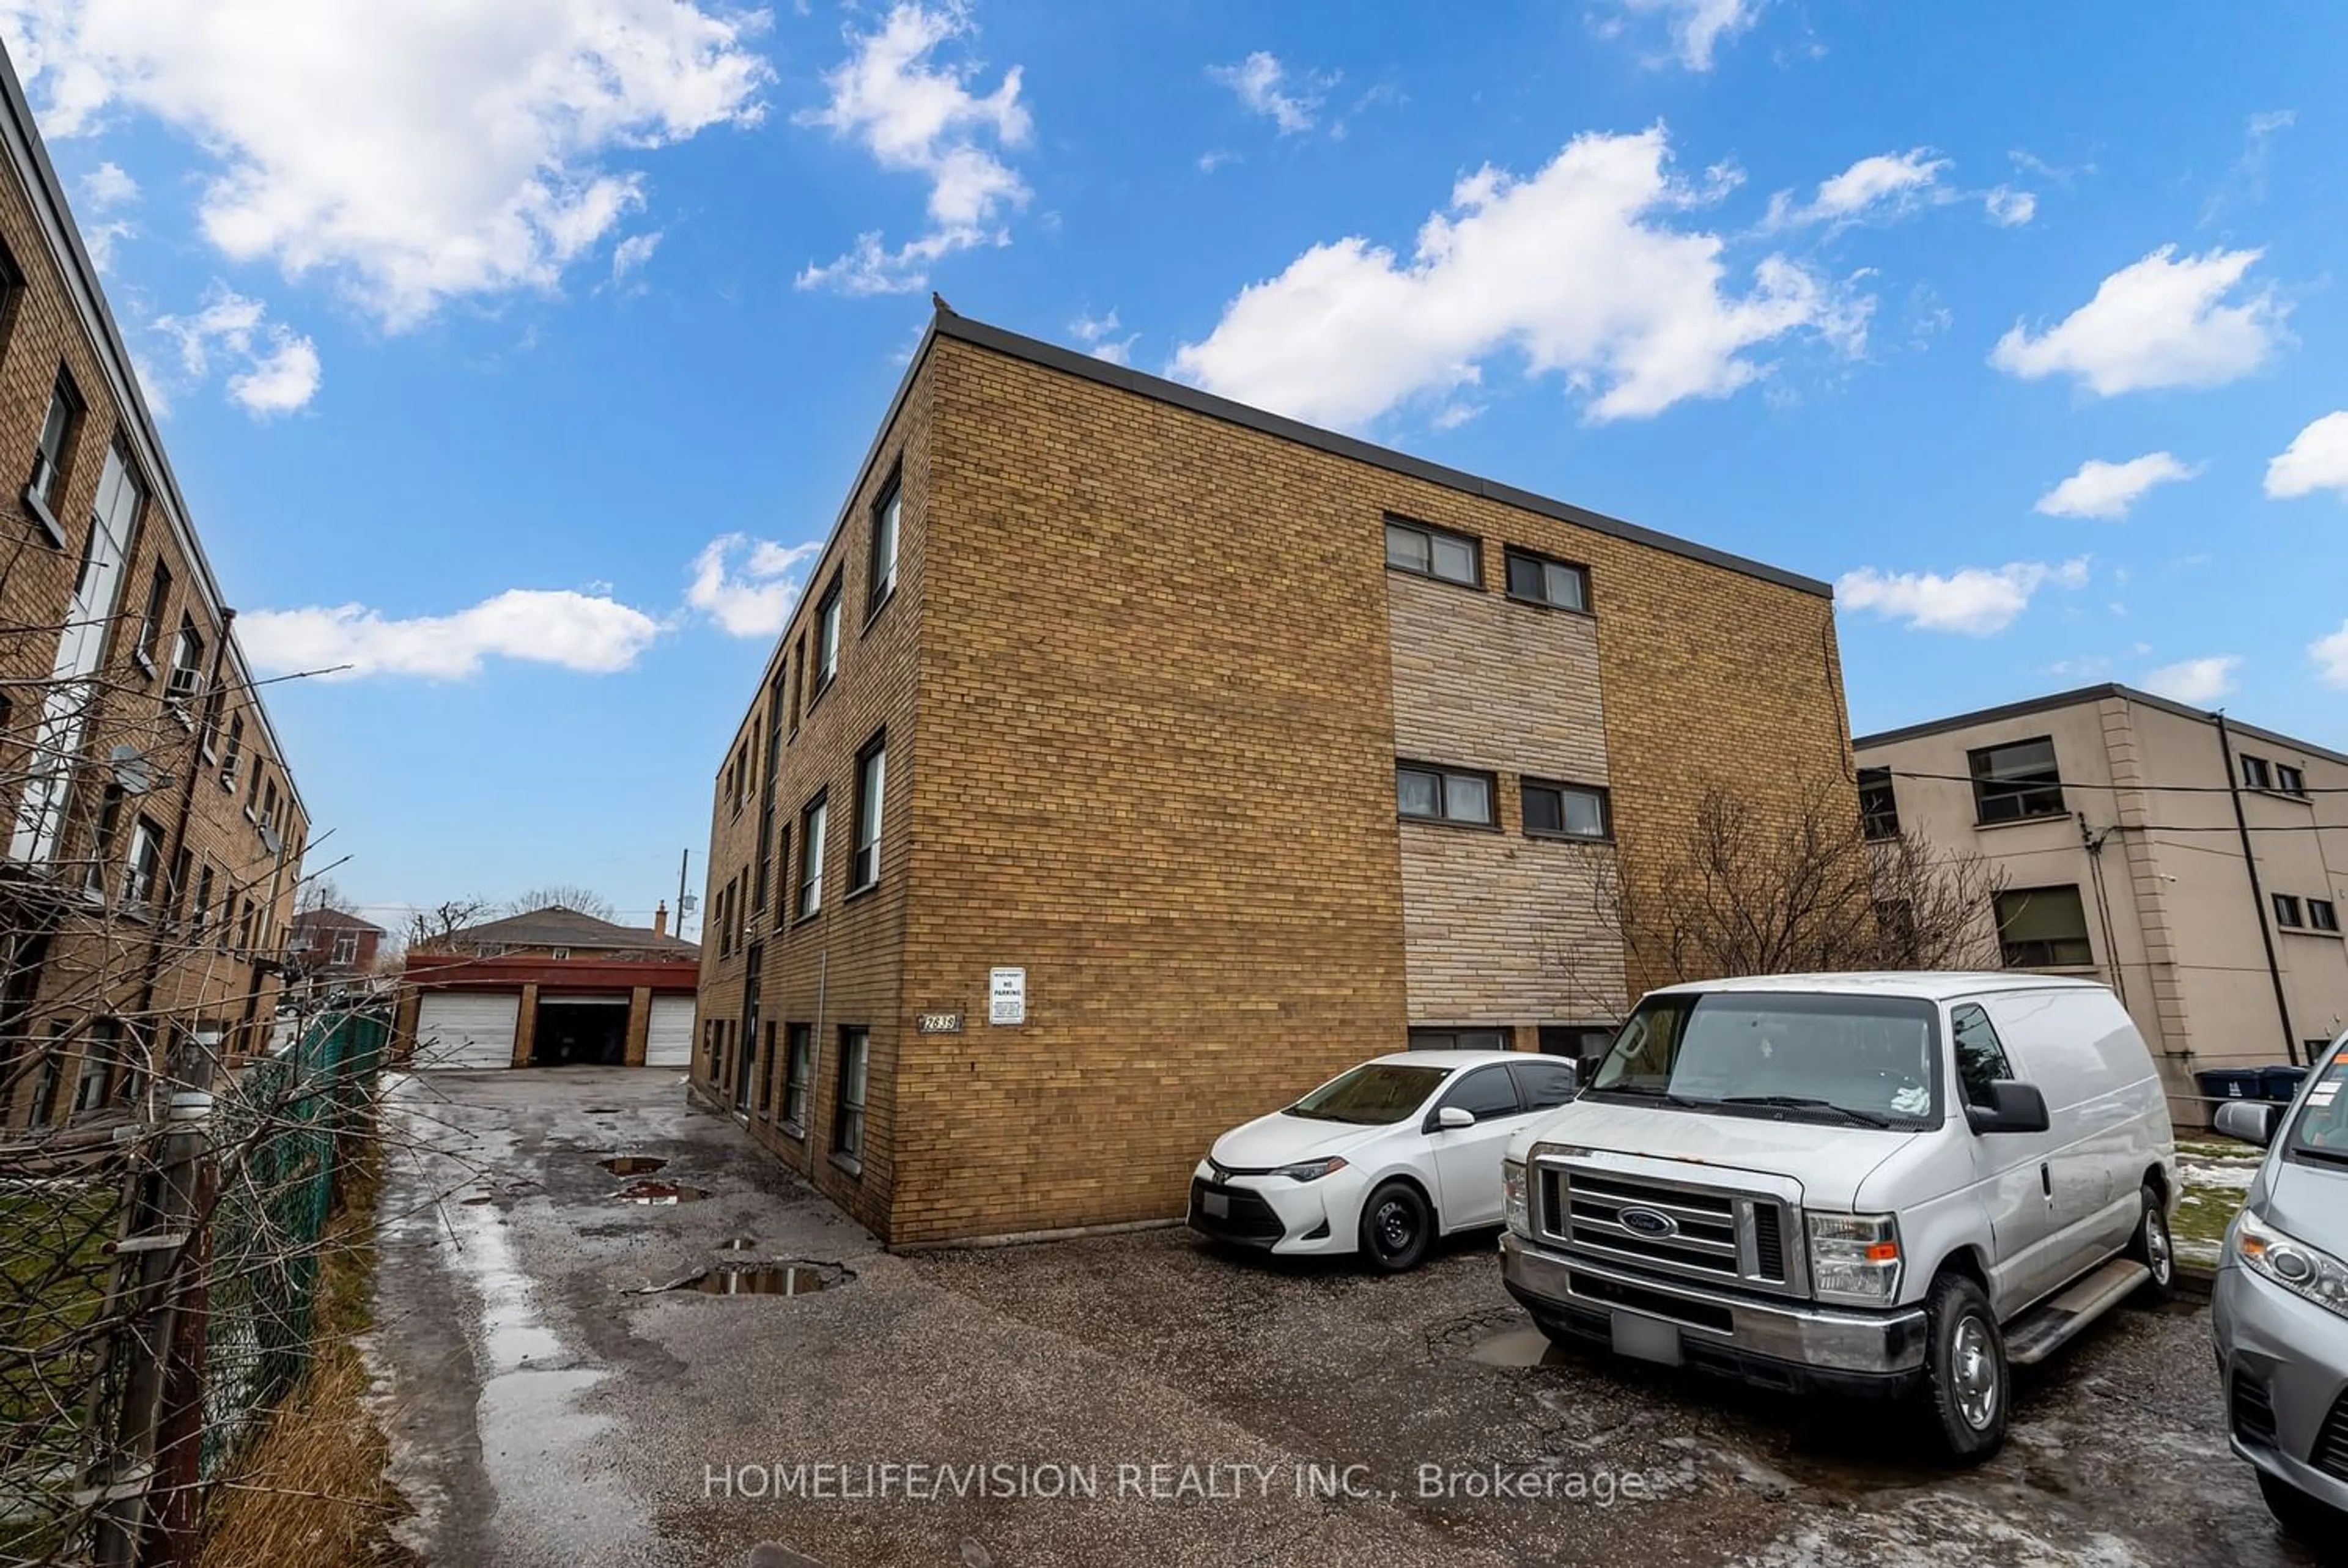 A pic from exterior of the house or condo for 2639 Keele St, Toronto Ontario M6L 2P2